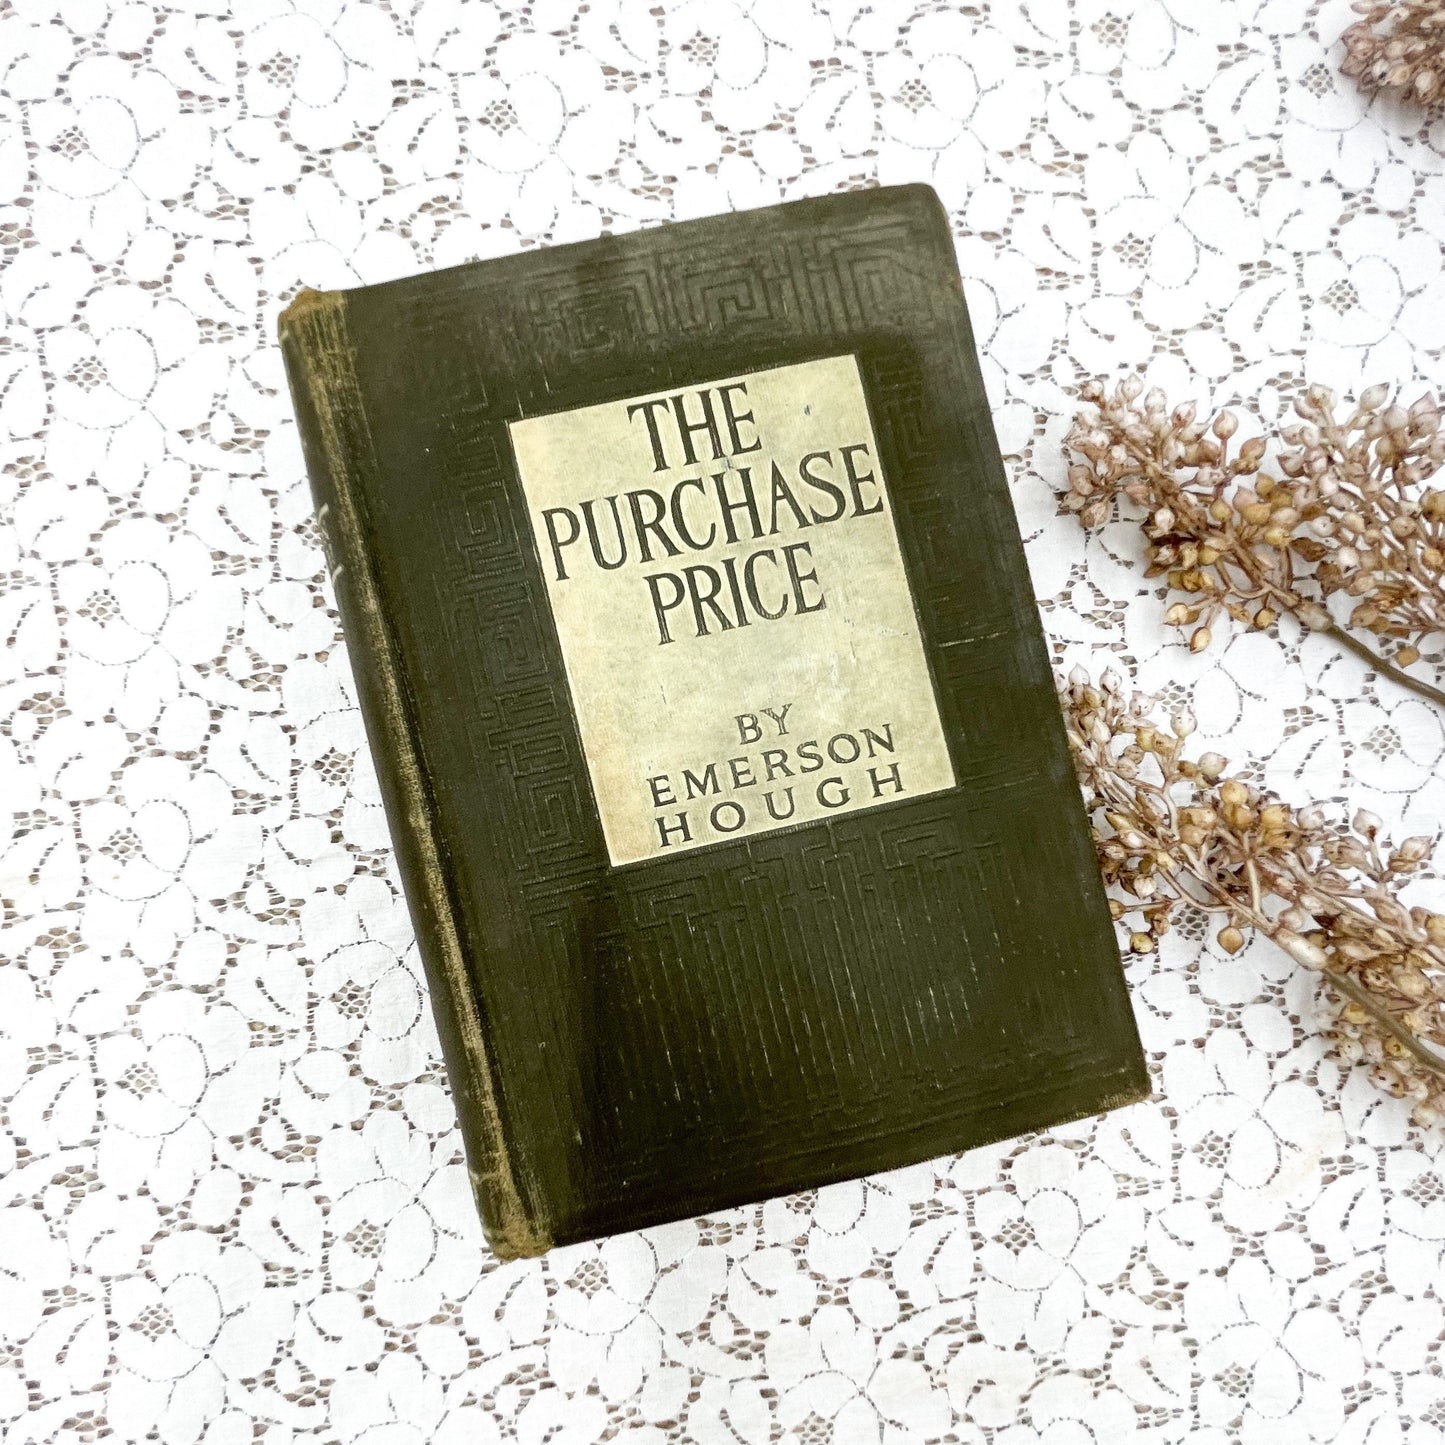 The Purchase Price by Emerson Hough